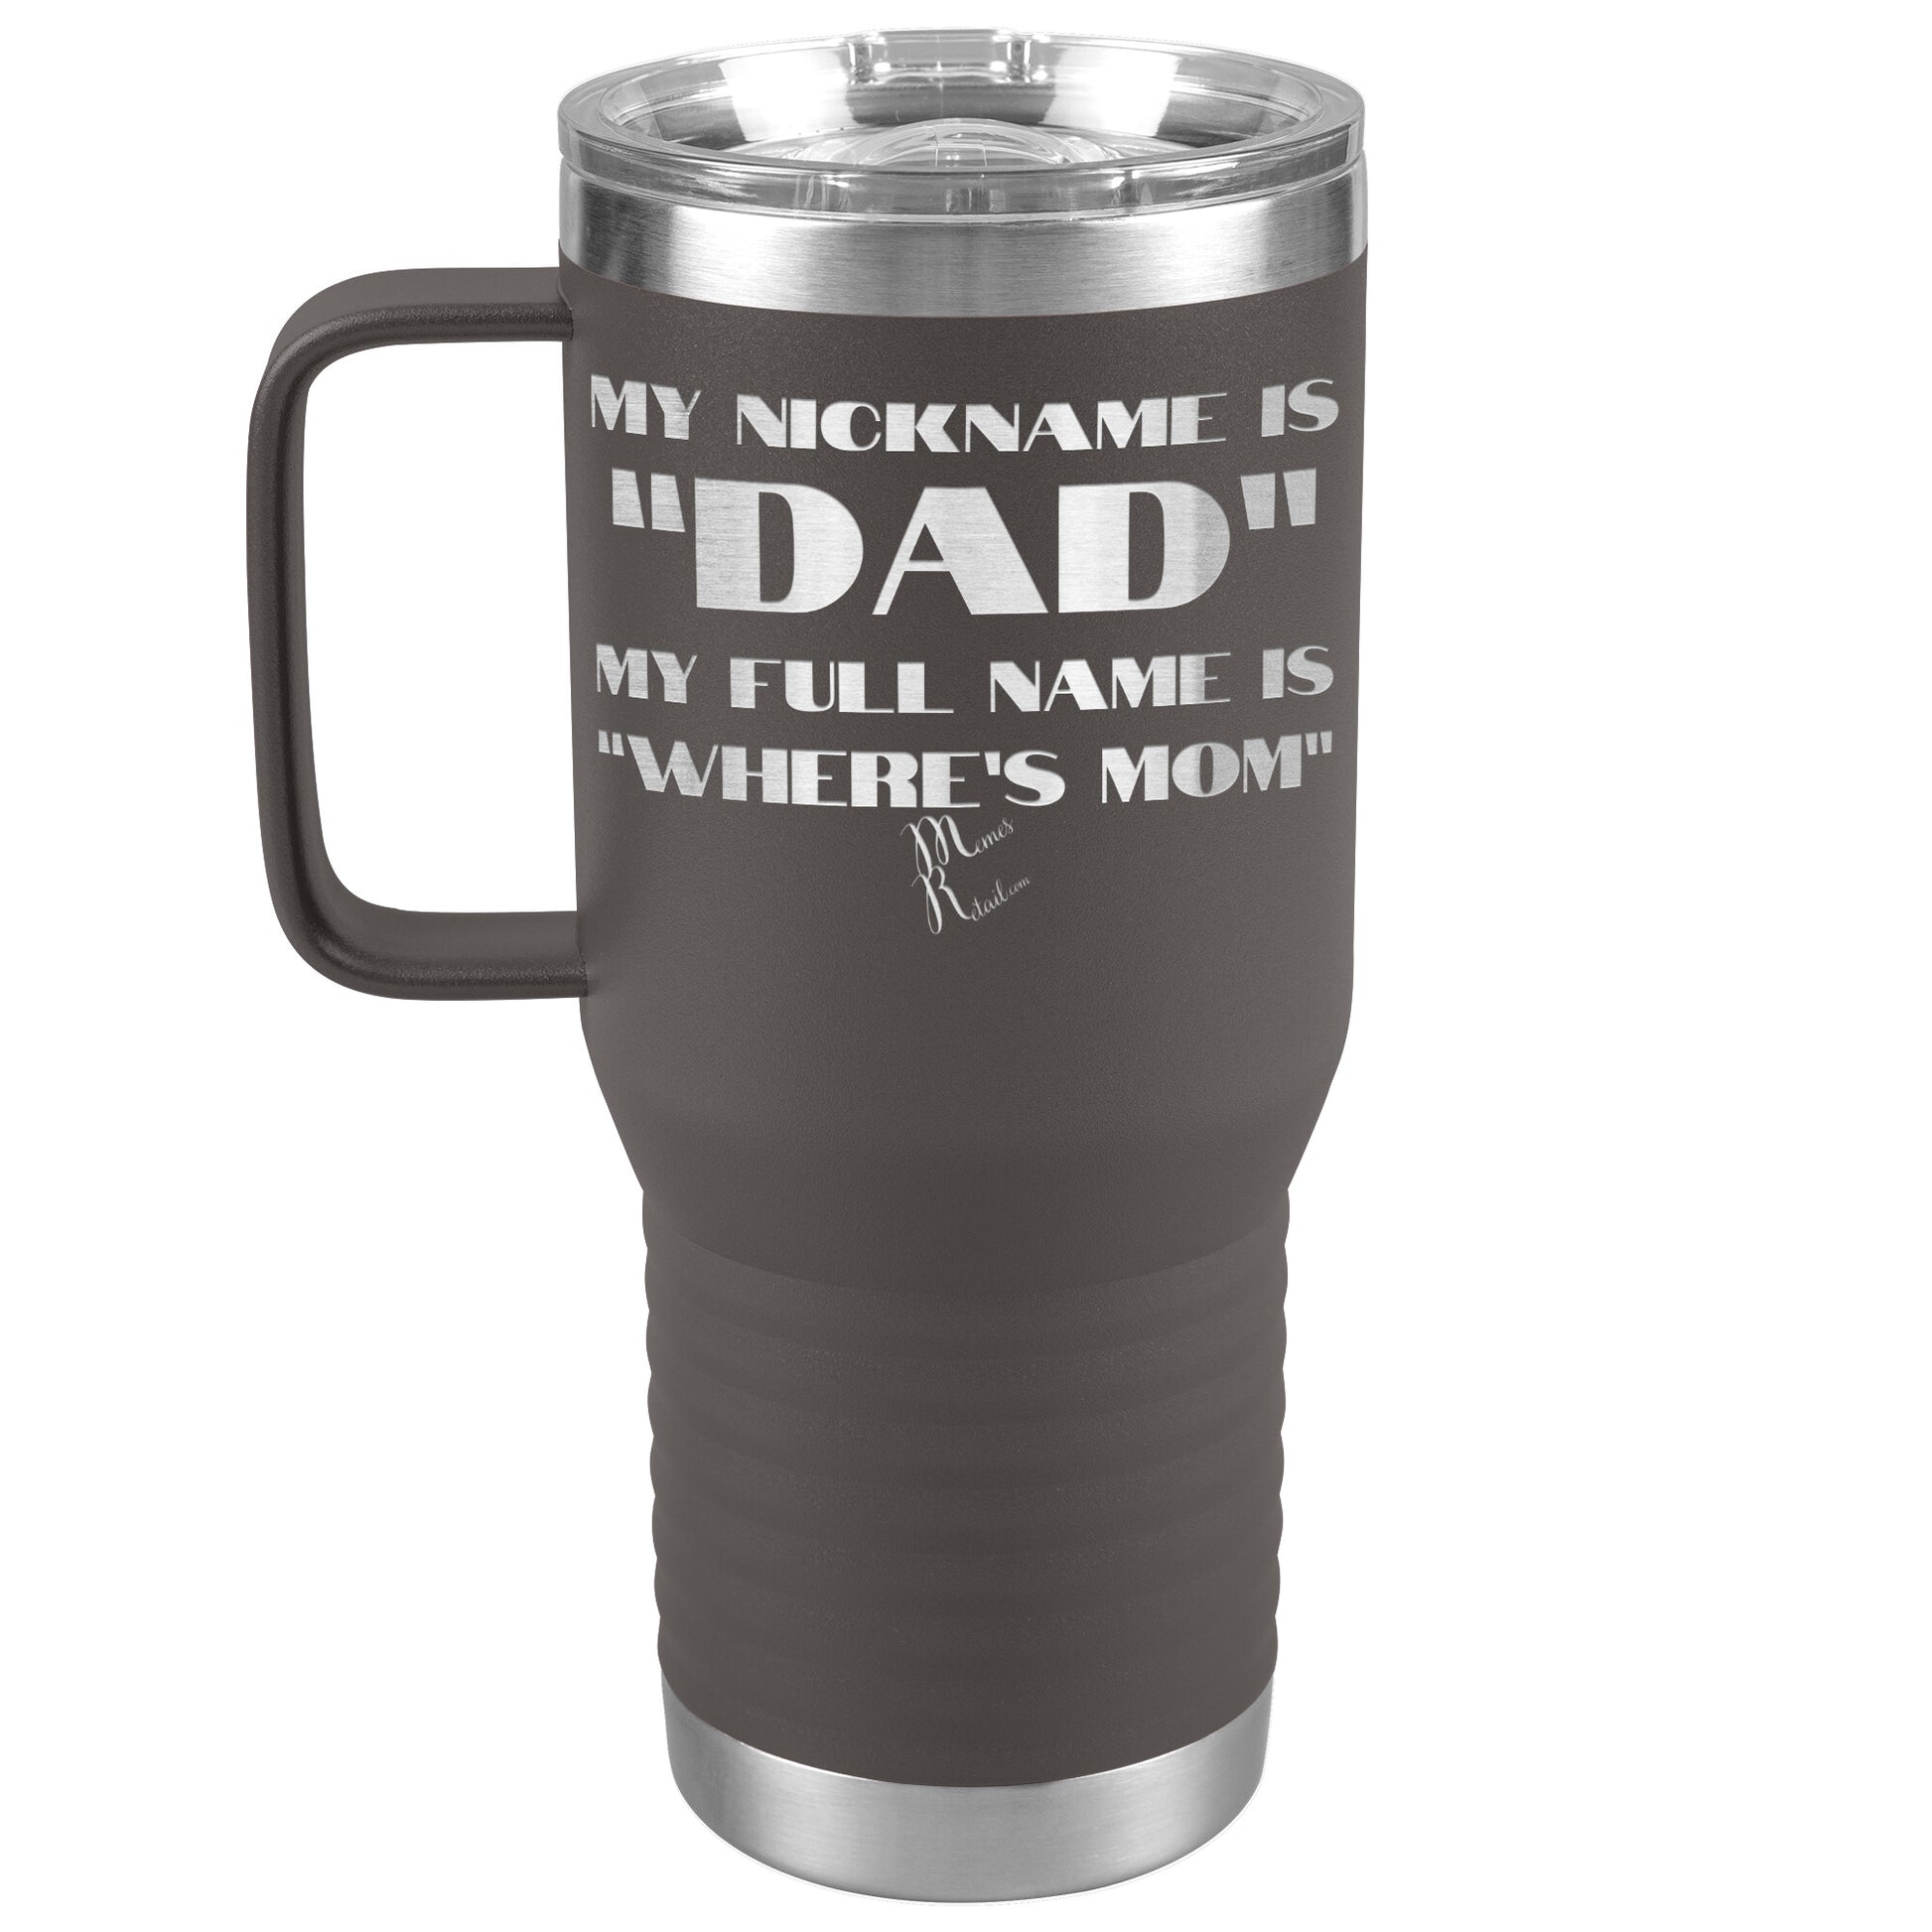 My Nickname is "Dad", My Full Name is "Where's Mom" Tumblers, 20oz Travel Tumbler / Pewter - MemesRetail.com